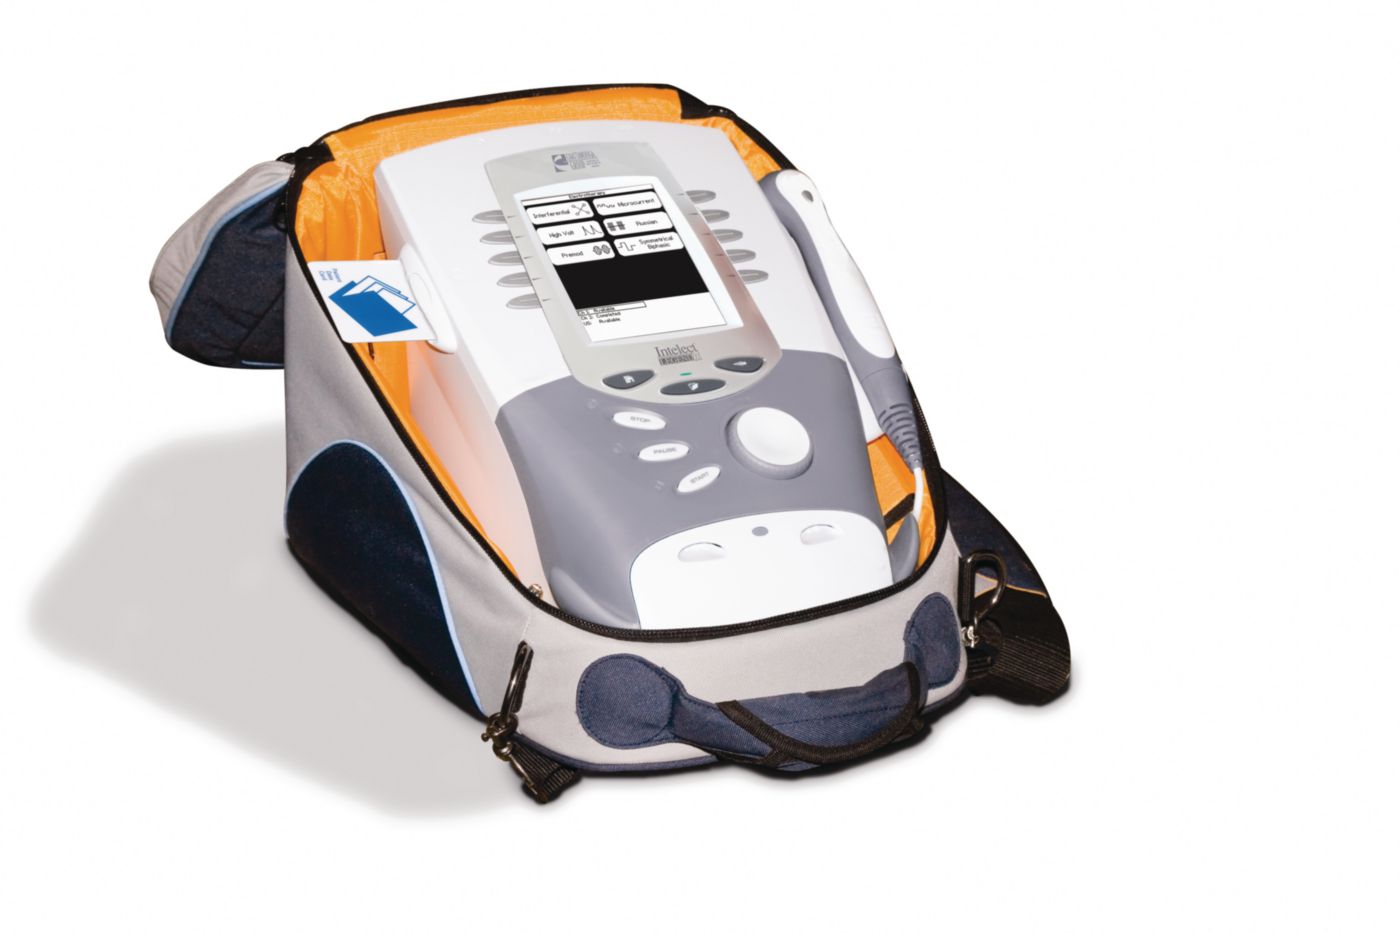 Chattanooga Ultrasound & Electrotherapy Units & Accessories